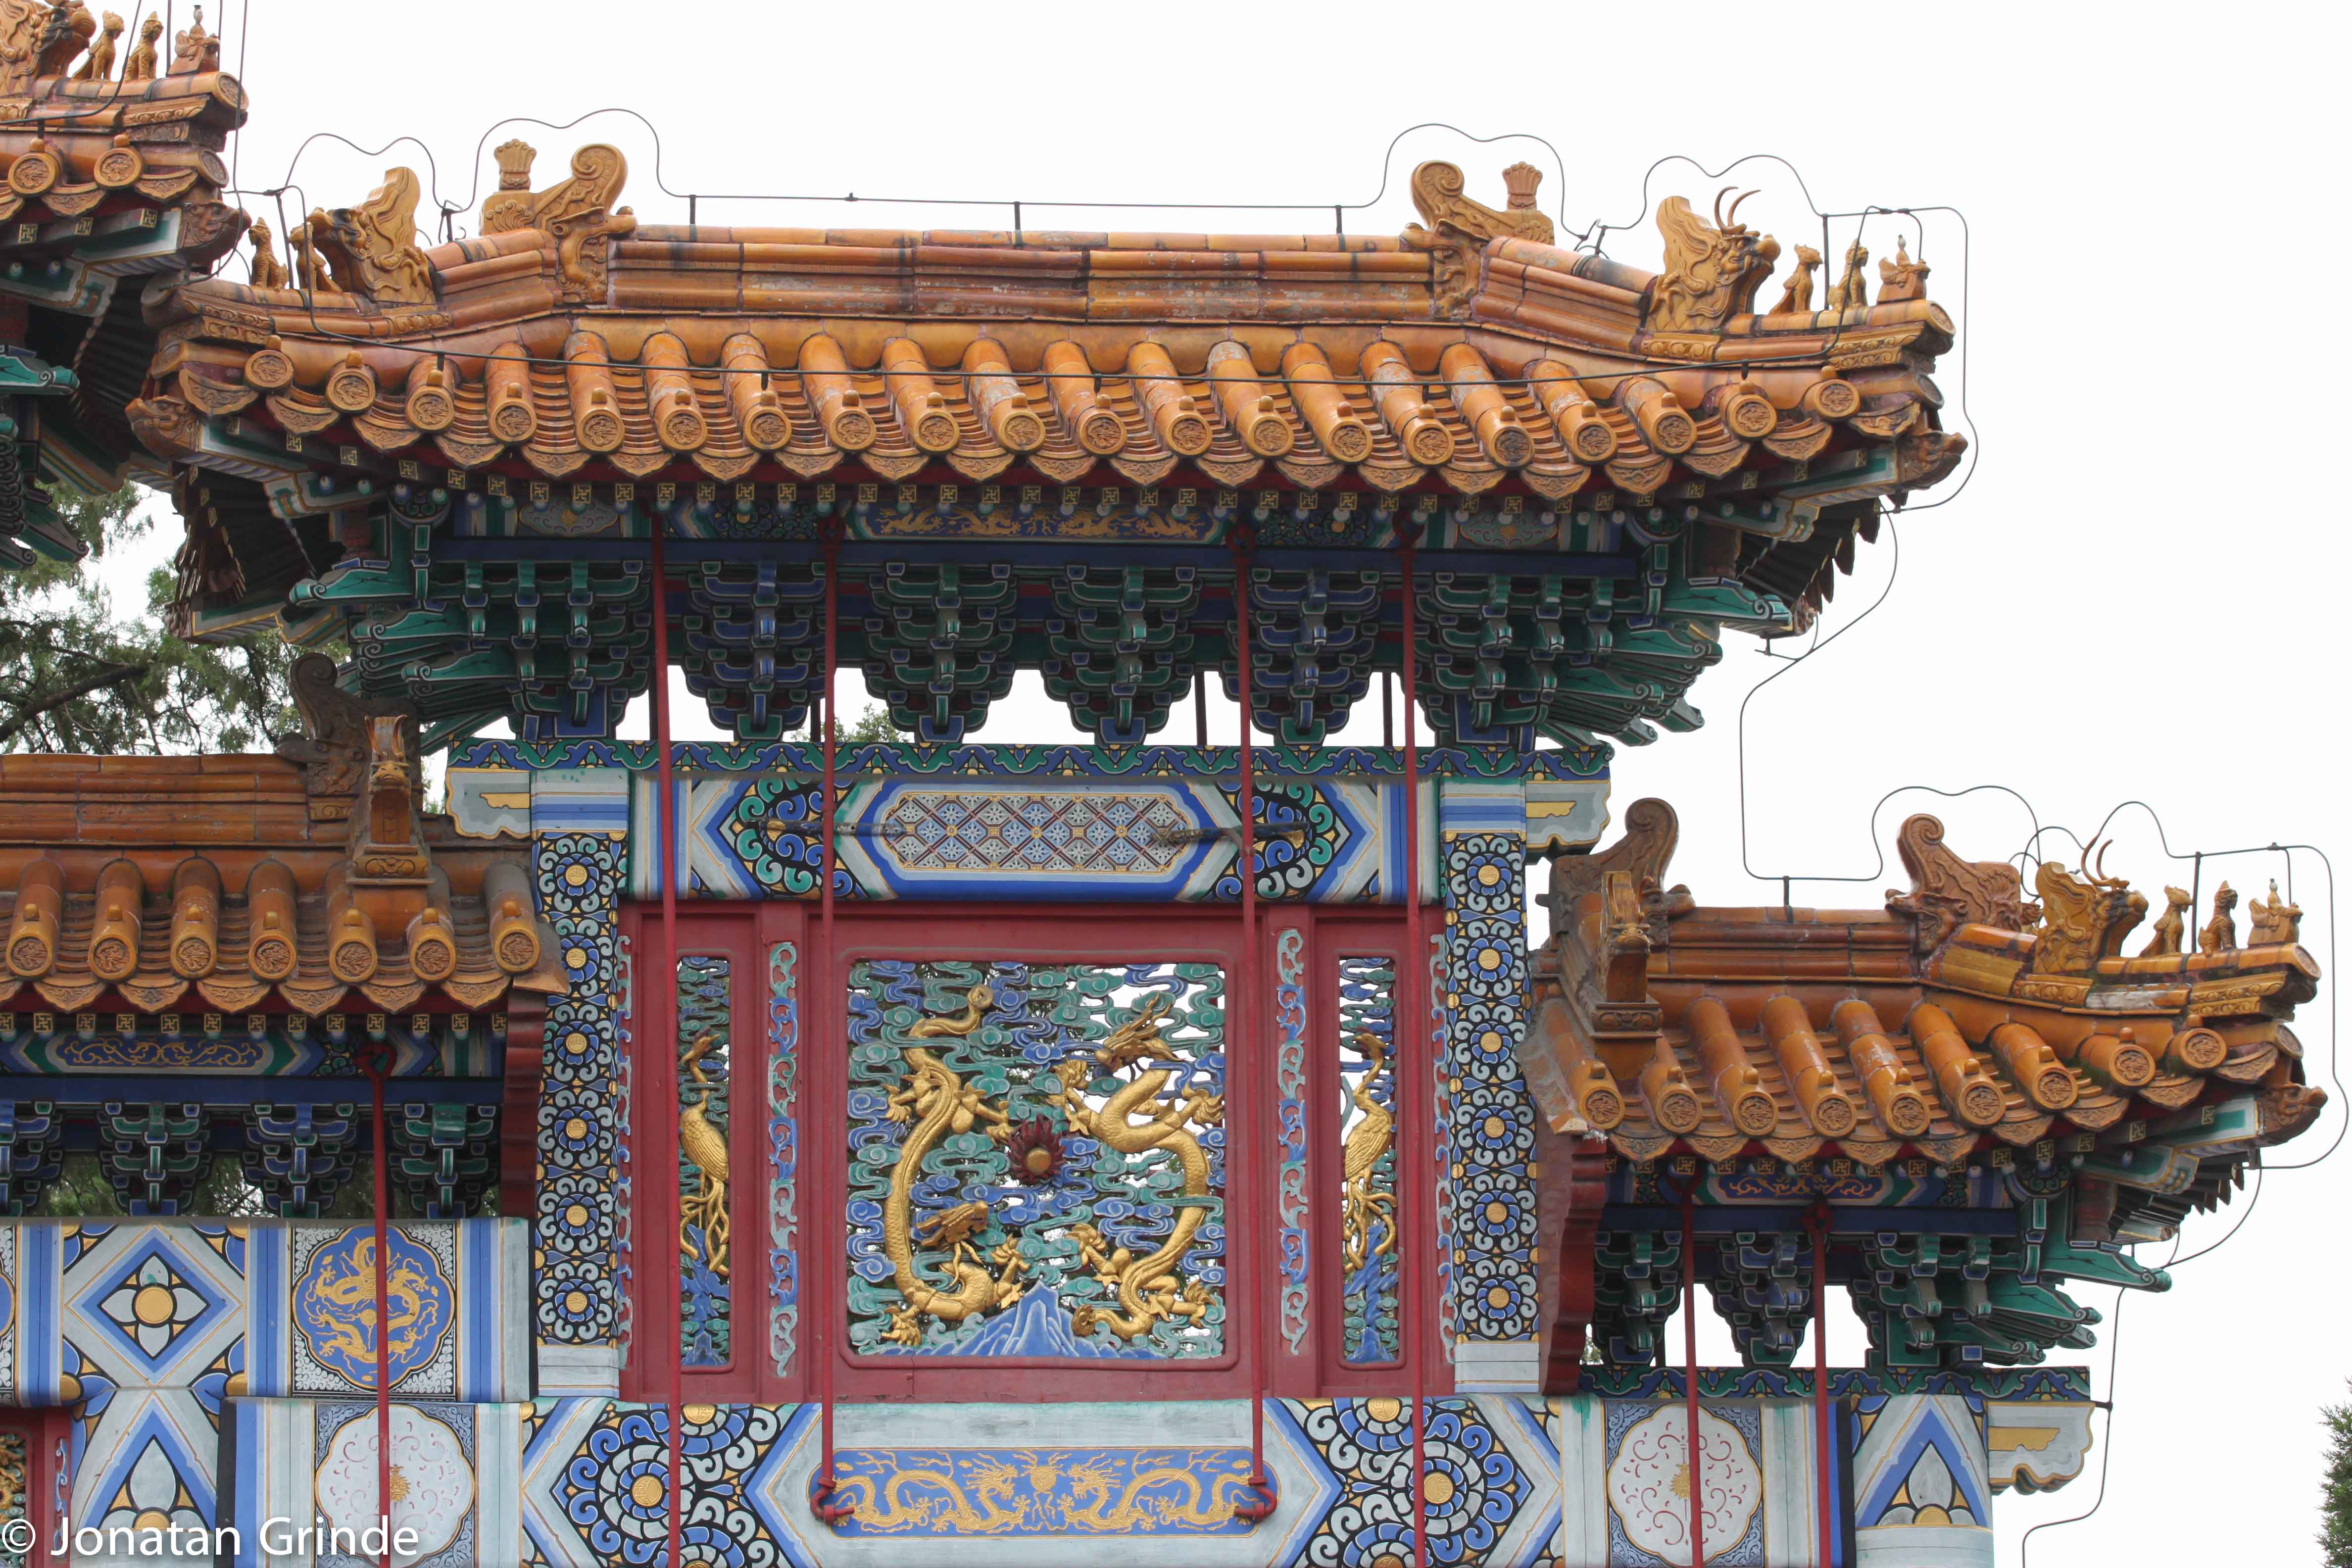 Part of a Chinese gate